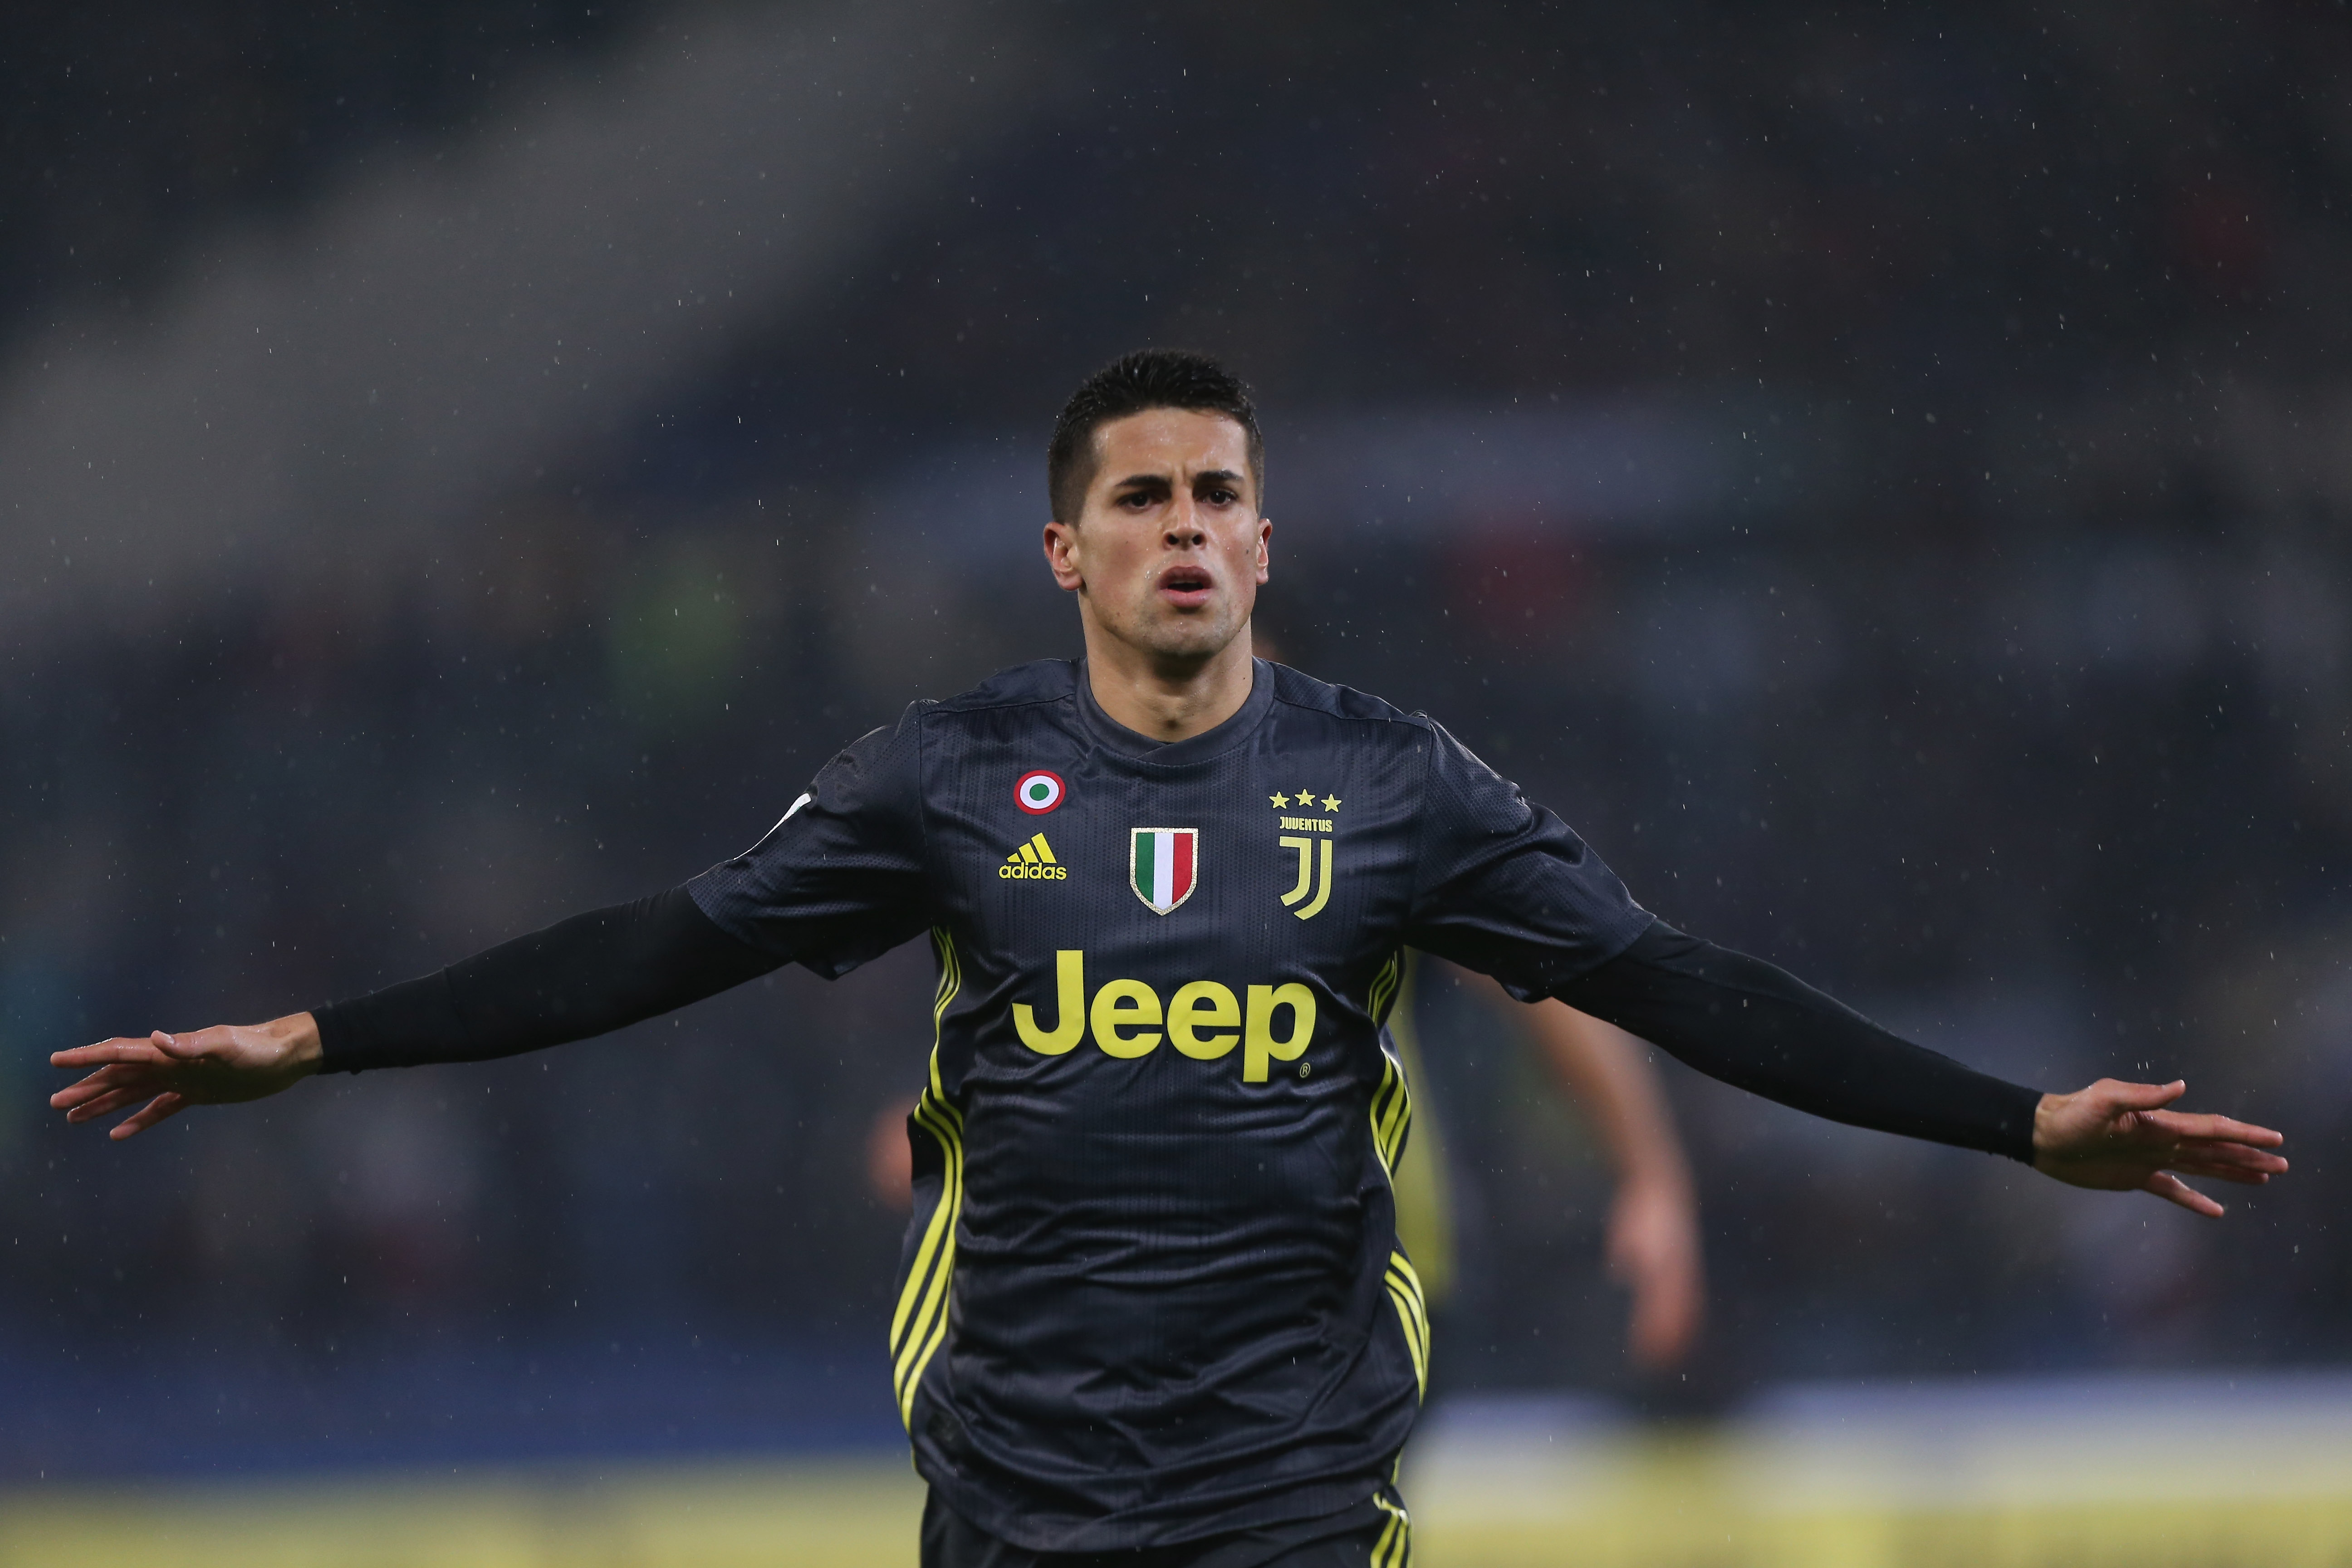 ROME, ITALY - JANUARY 27:  Joao Cancelo of Juventus celebrates after scoring the team's first goal during the Serie A match between SS Lazio and Juventus at Stadio Olimpico on January 27, 2019 in Rome, Italy.  (Photo by Paolo Bruno/Getty Images)